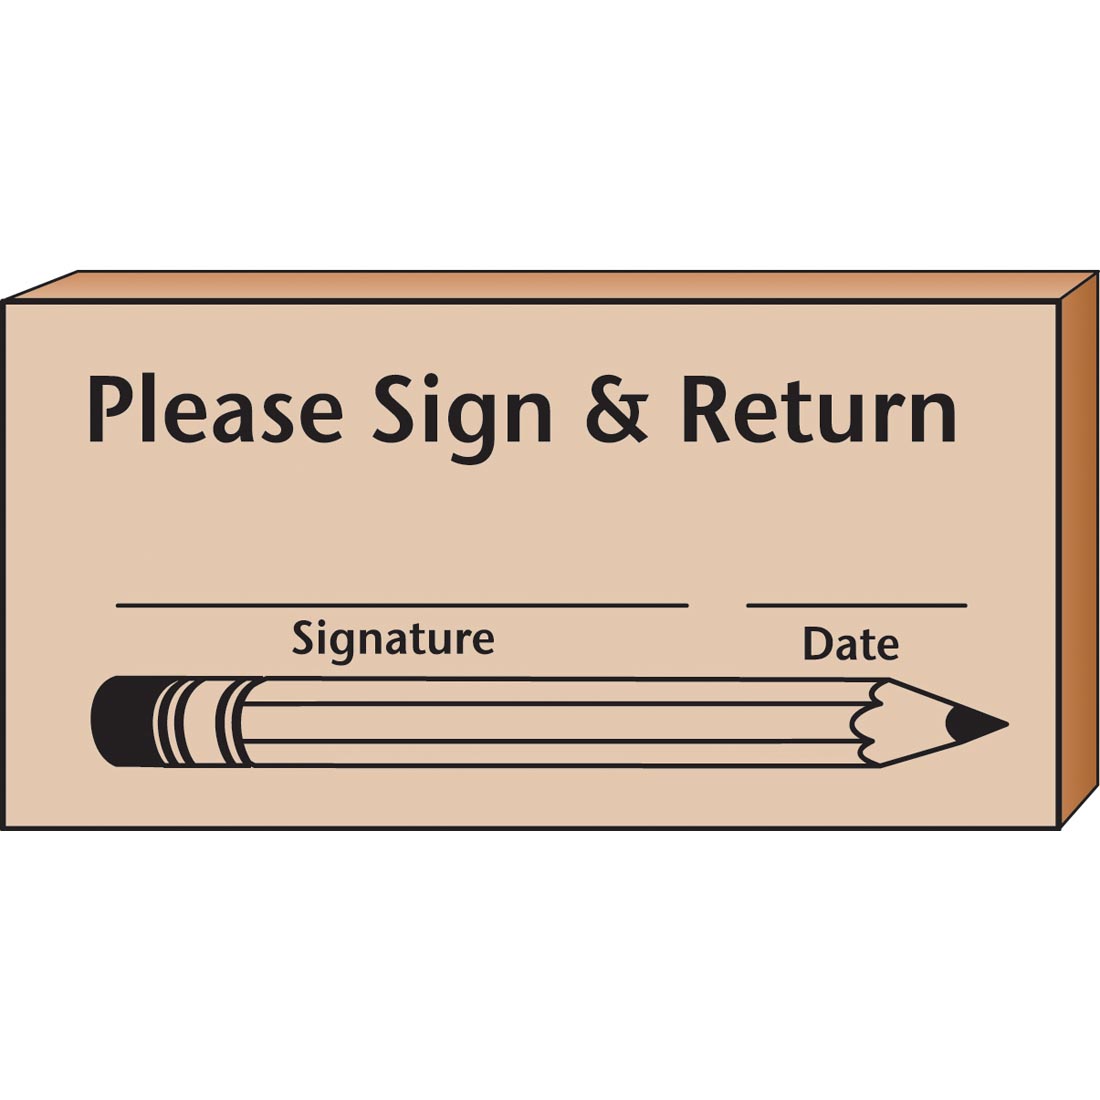 Please Sign and Return Stamp with place for signature and date